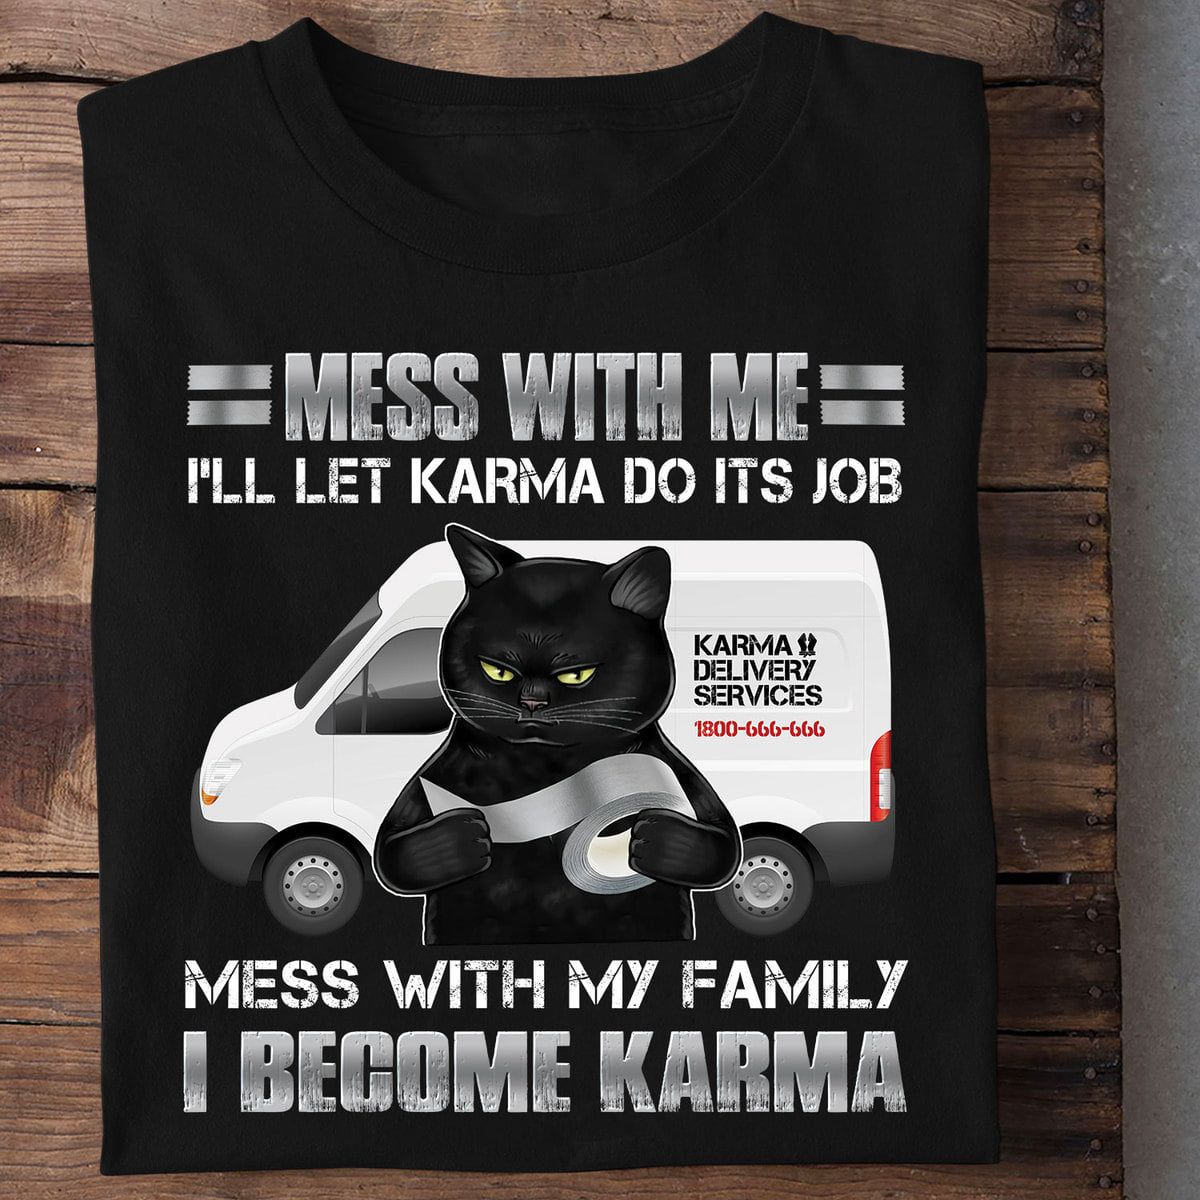 Black Cat And Duct Tape, Karma Delivery Services - Mess with me i'll let karma do its job mess with my family i become karma